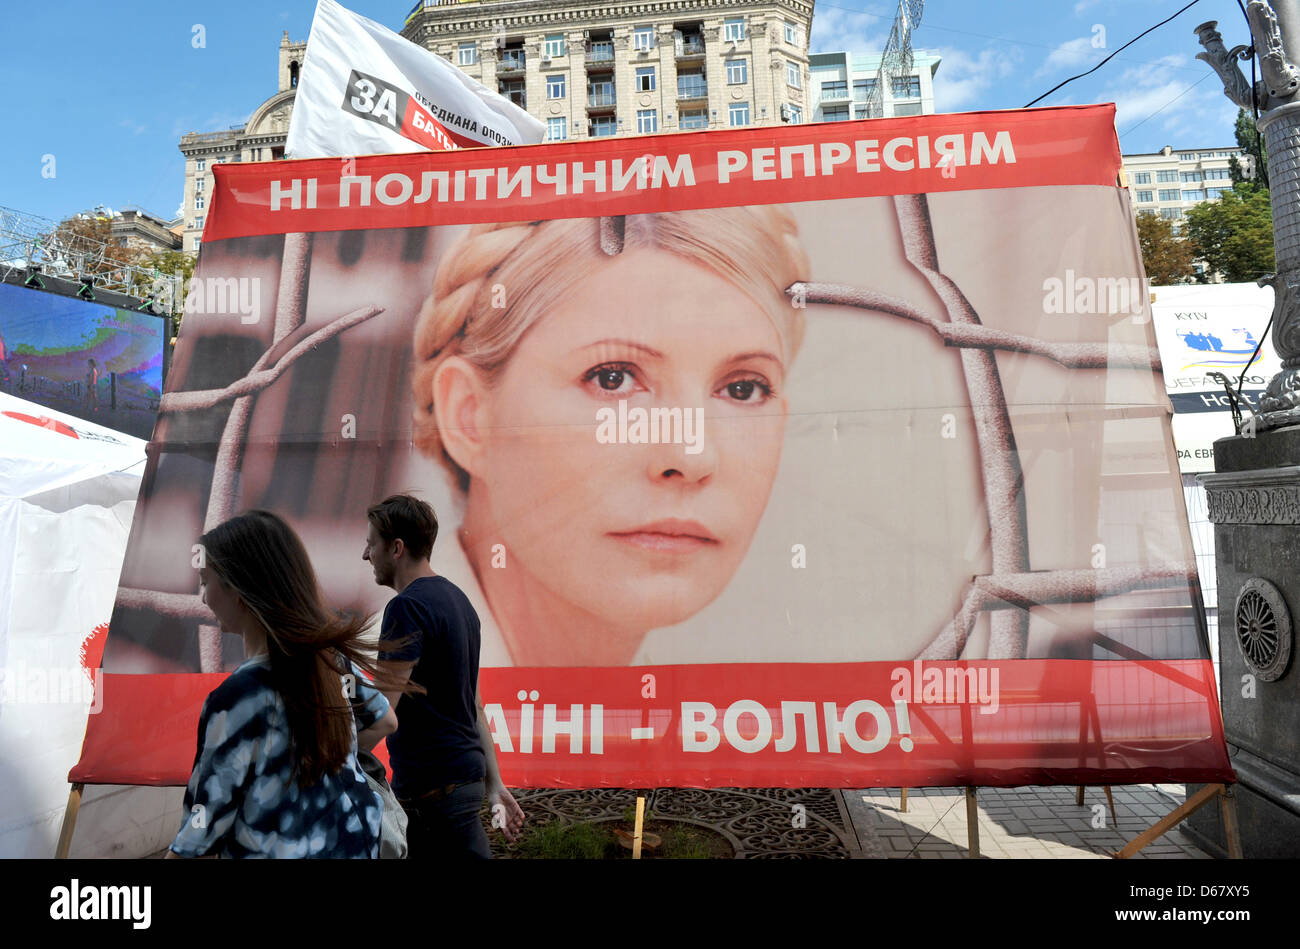 People walk past a placard of the Ukranian politician Yulia Tymoshenko in a protest camp in downtown Kiev, Ukraine, 30 June 2012. The Euro 2012 championships were discussed controversially over the case of Ukraine's jailed former Prime Minister Yulia Tymoshenko. Photo: ANDREAS GEBERT Stock Photo